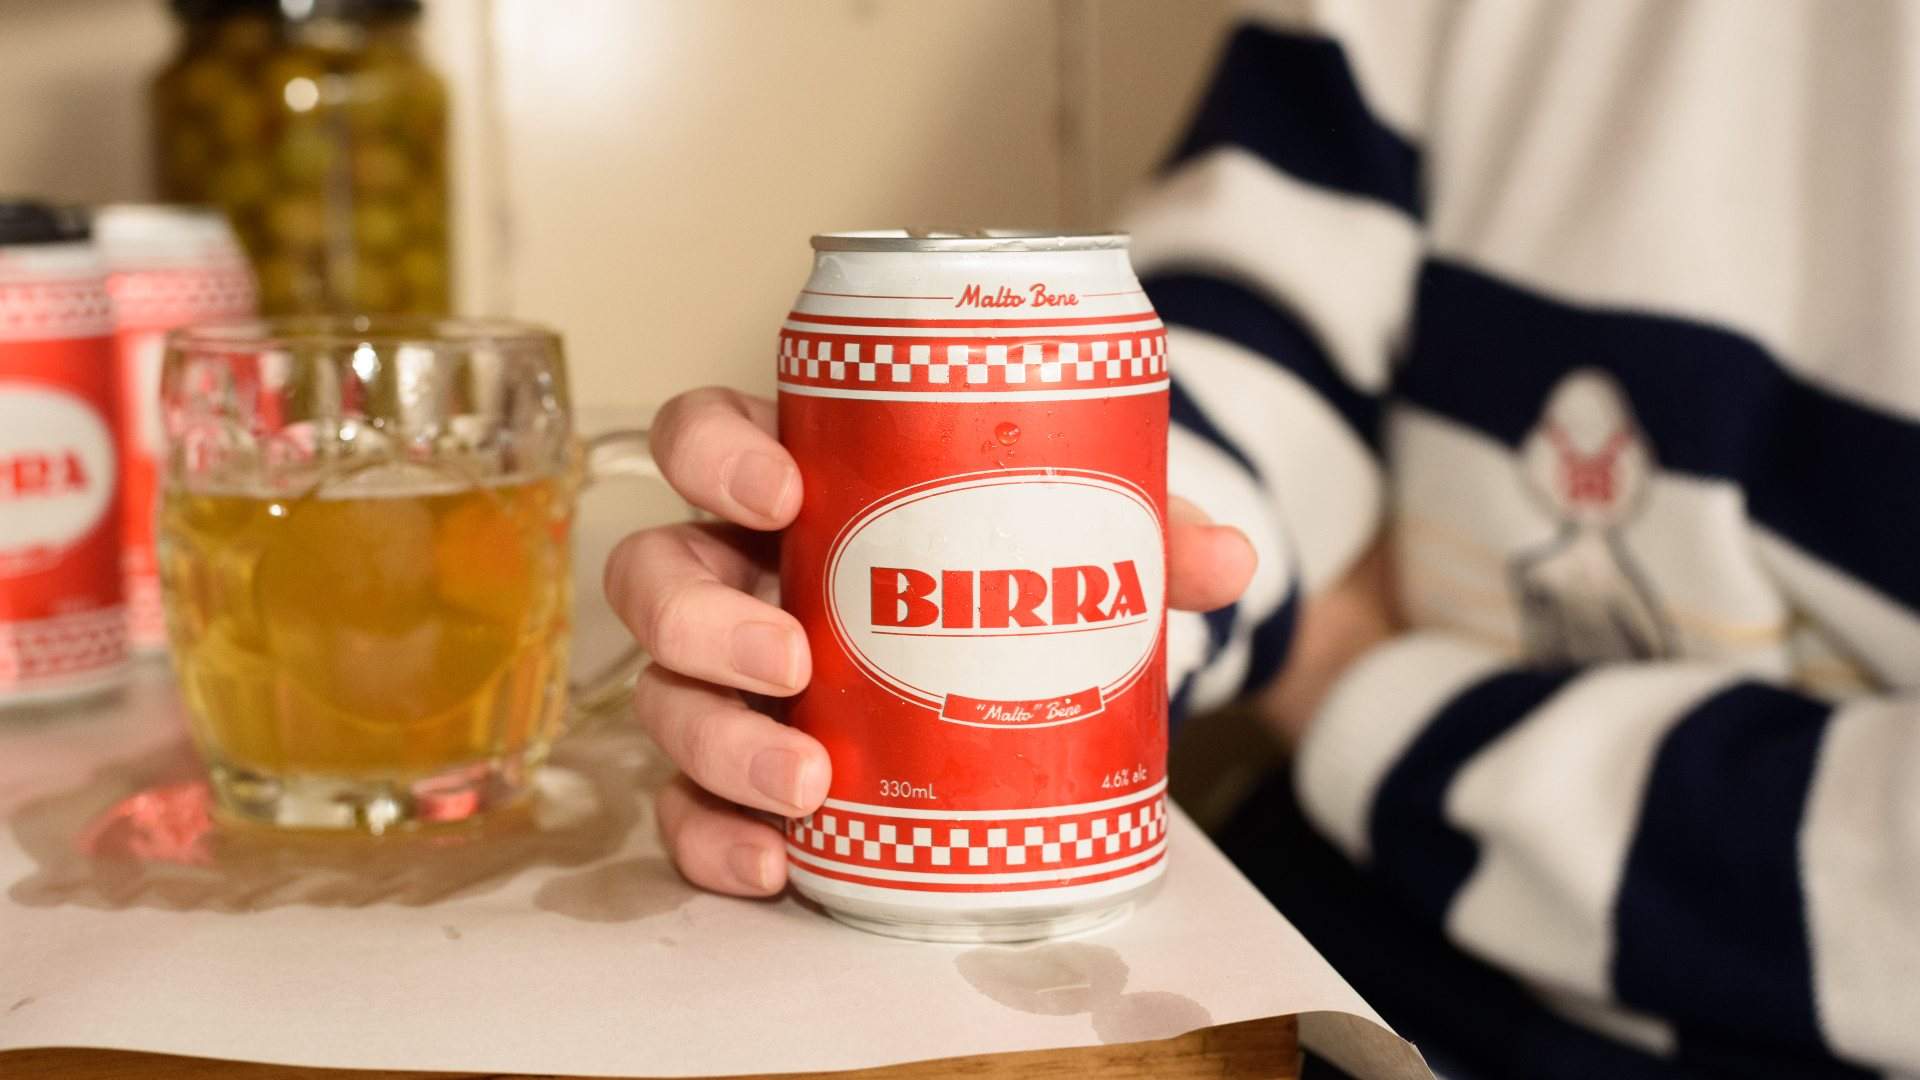 Birra Is the New Italian Lager by Blackhearts & Sparrows and Its First-Ever House Release Beer